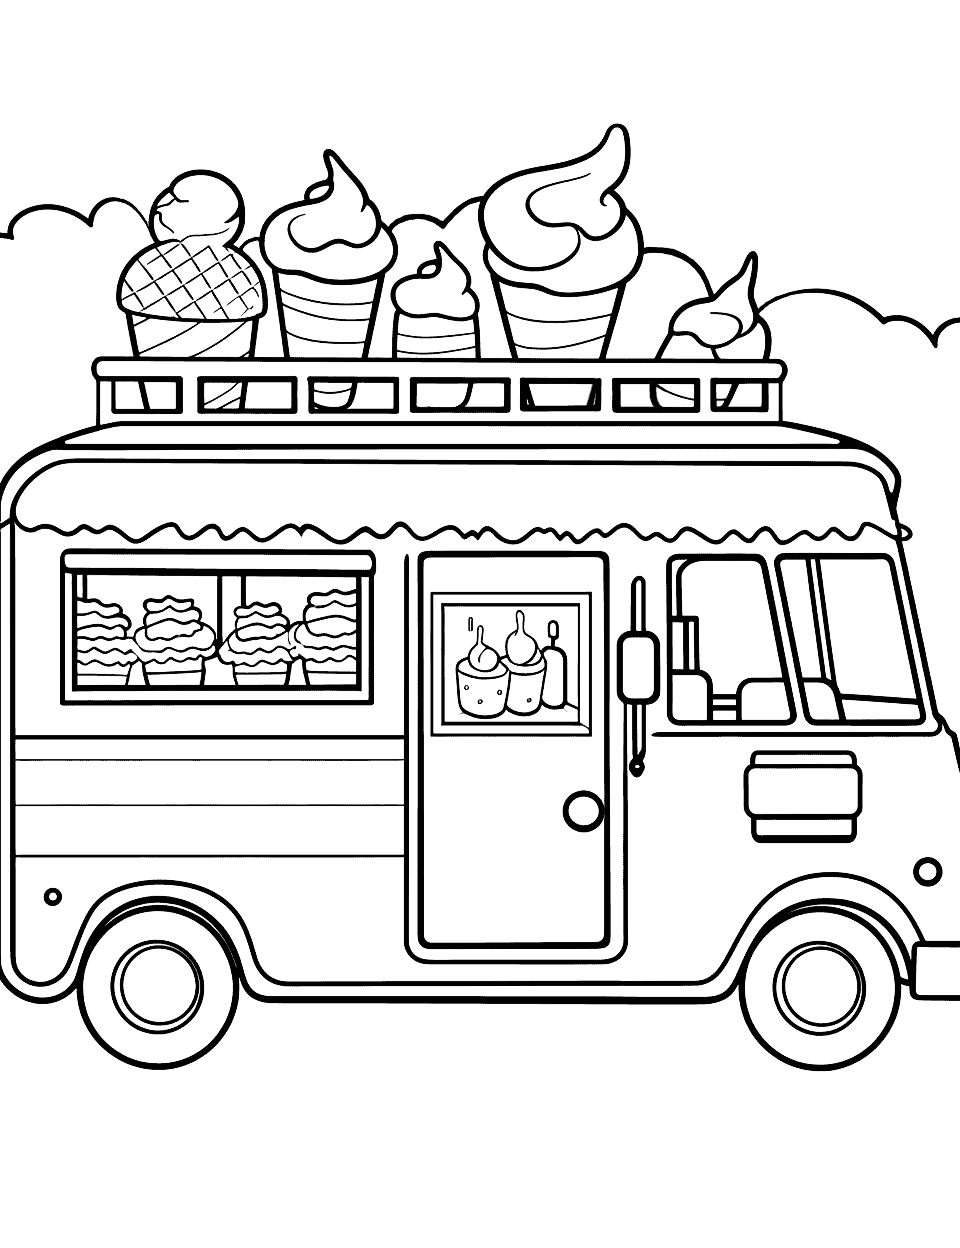 Ice Cream Truck Treats Summer Coloring Page - A colorful ice cream truck with a variety of ice creams visible in the display window.